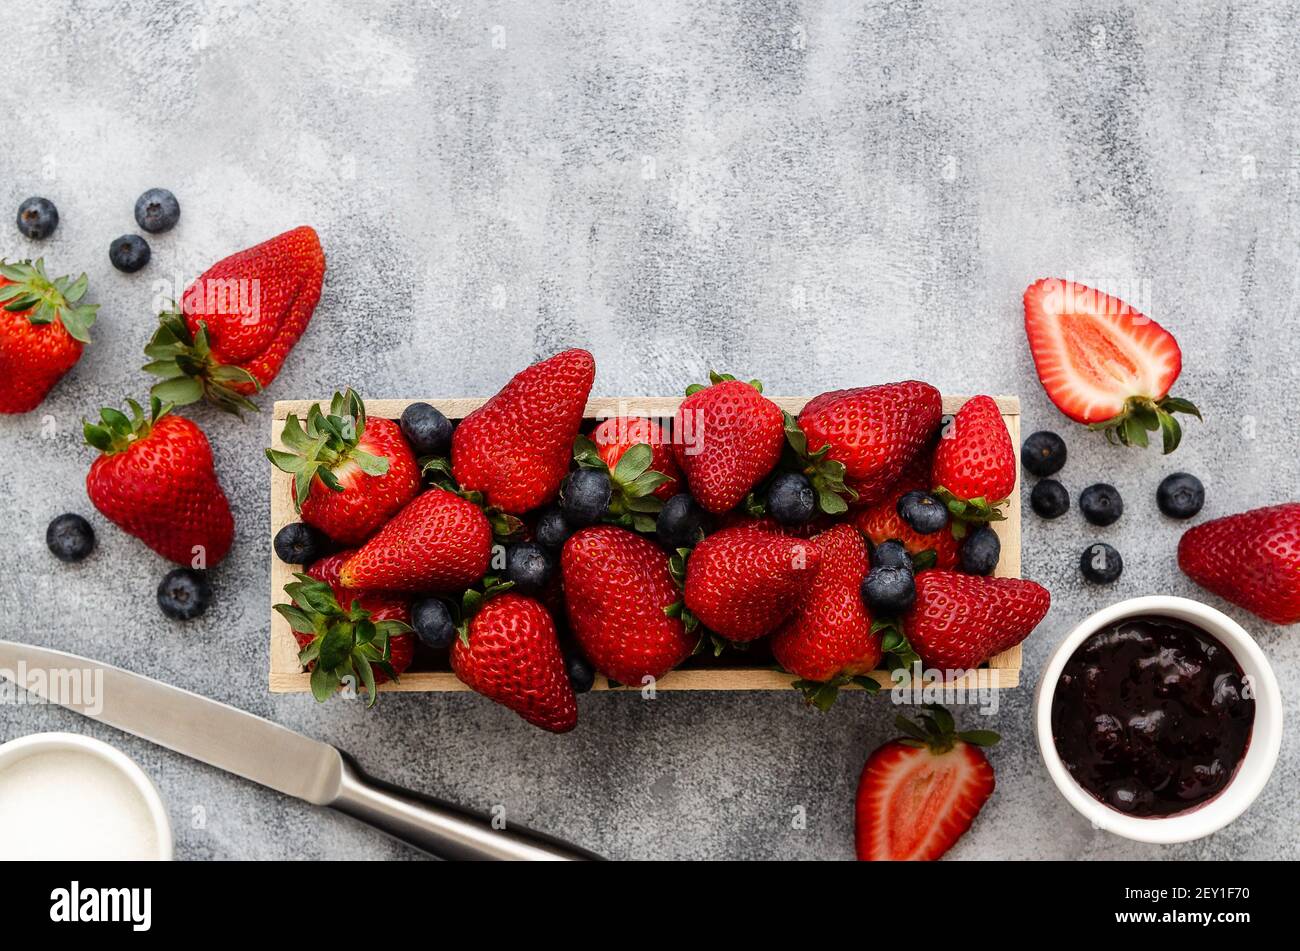 Strawberries and blueberries in a wooden rectangular box, strawberry and blueberry jam and sugar in white bowls with a knife, on grey backdrop. Stock Photo